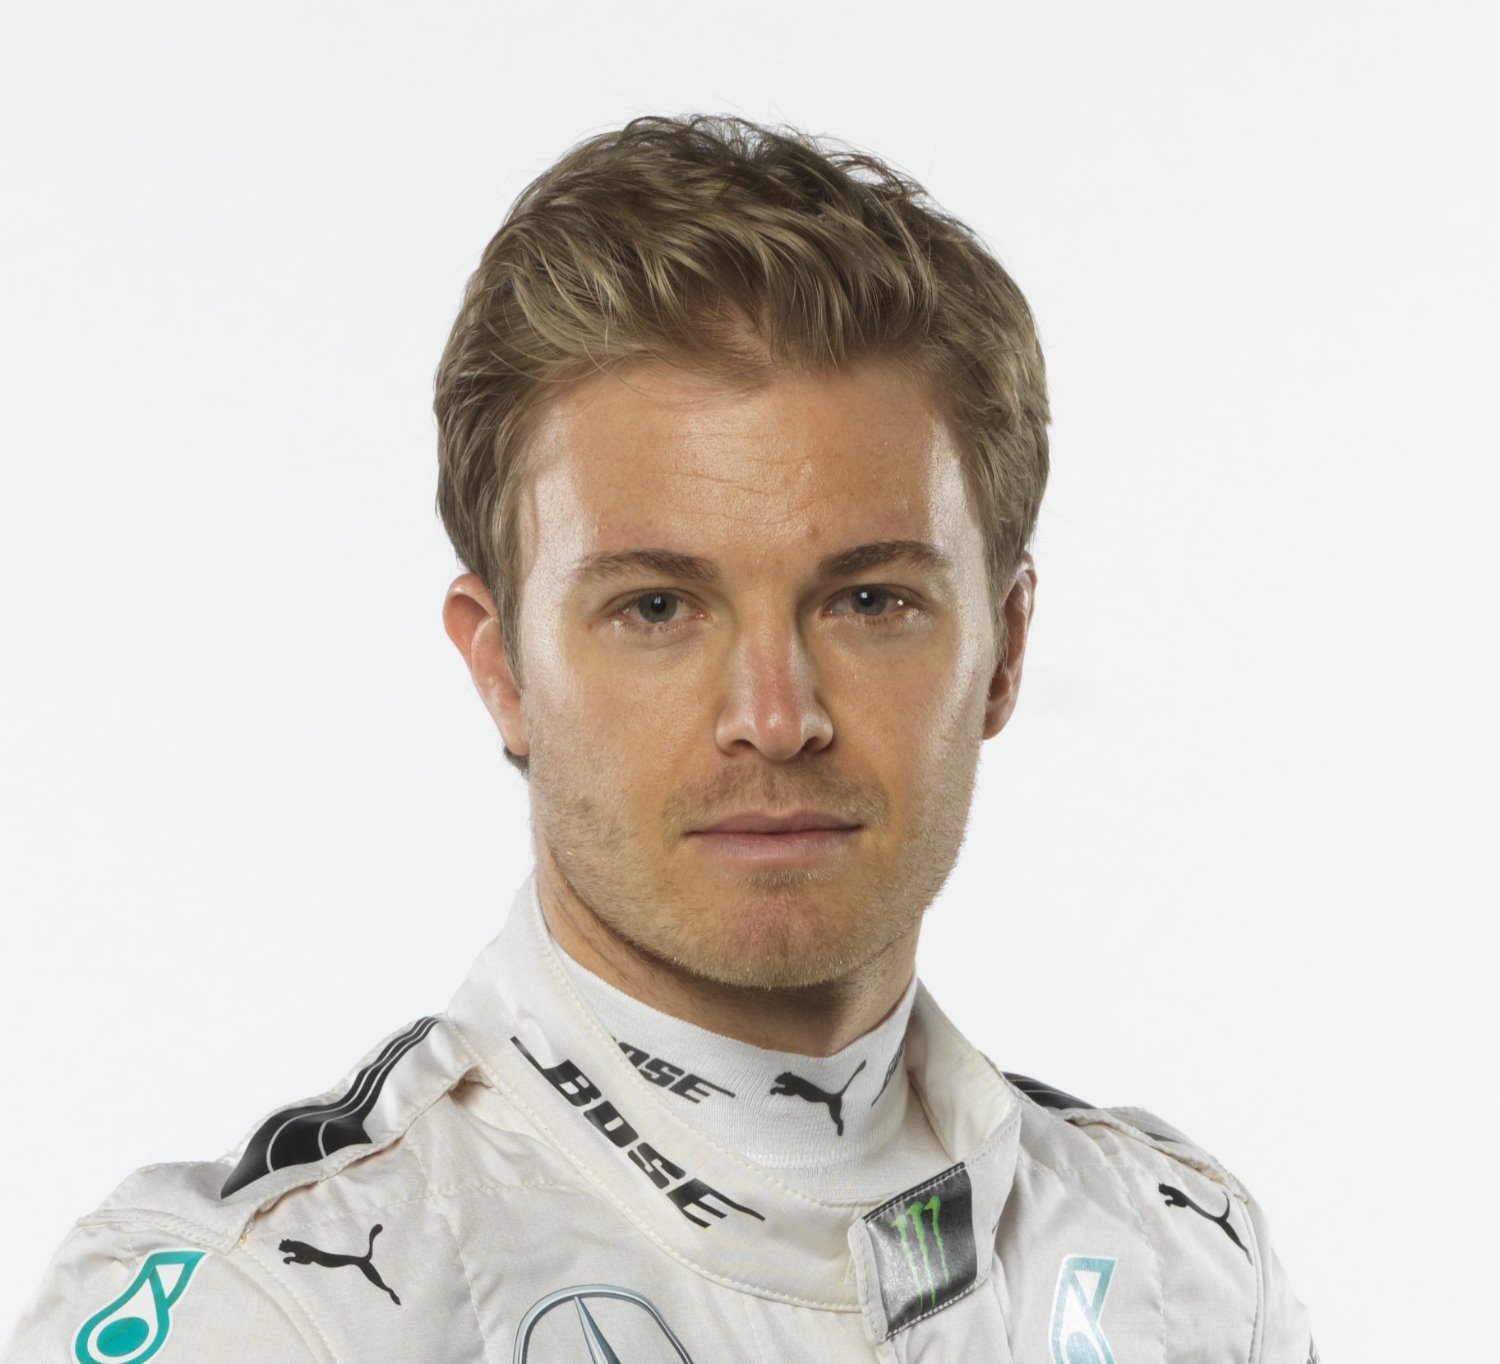 Rosberg hopes for a new contract soon